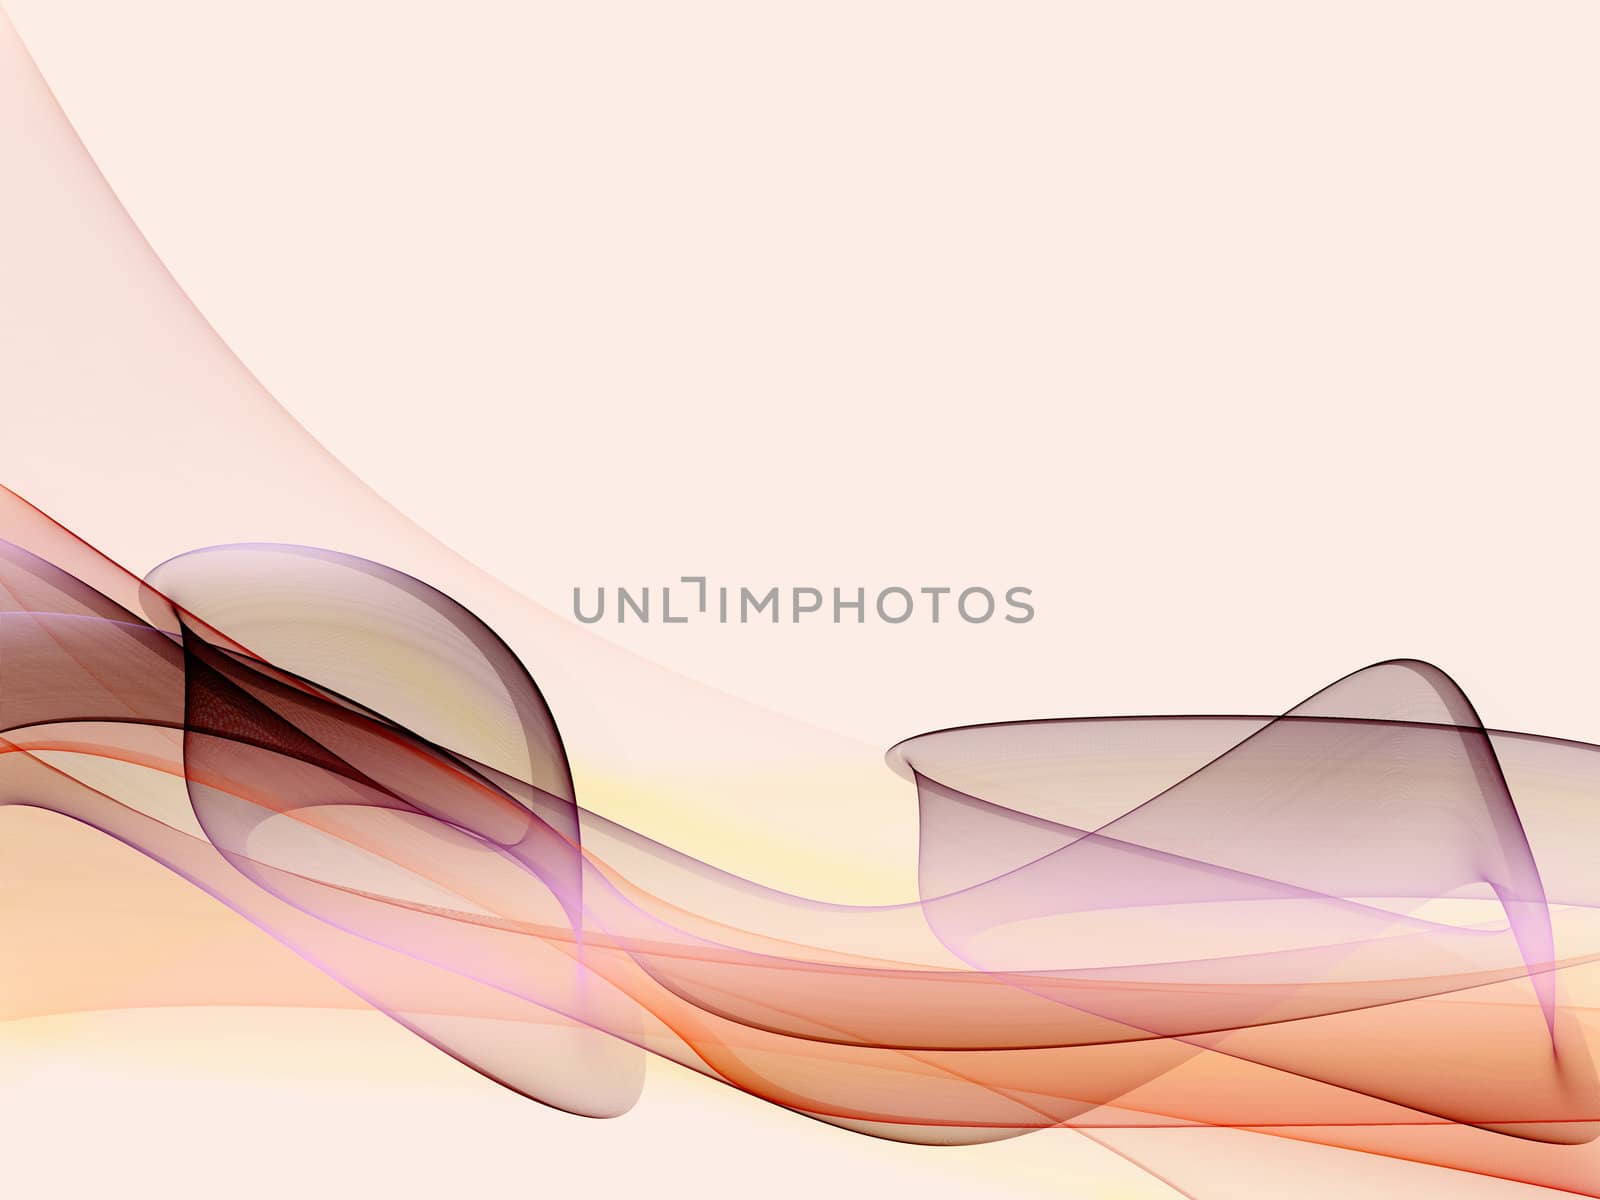 An abstract illustration of shapes in different colors on light purple background